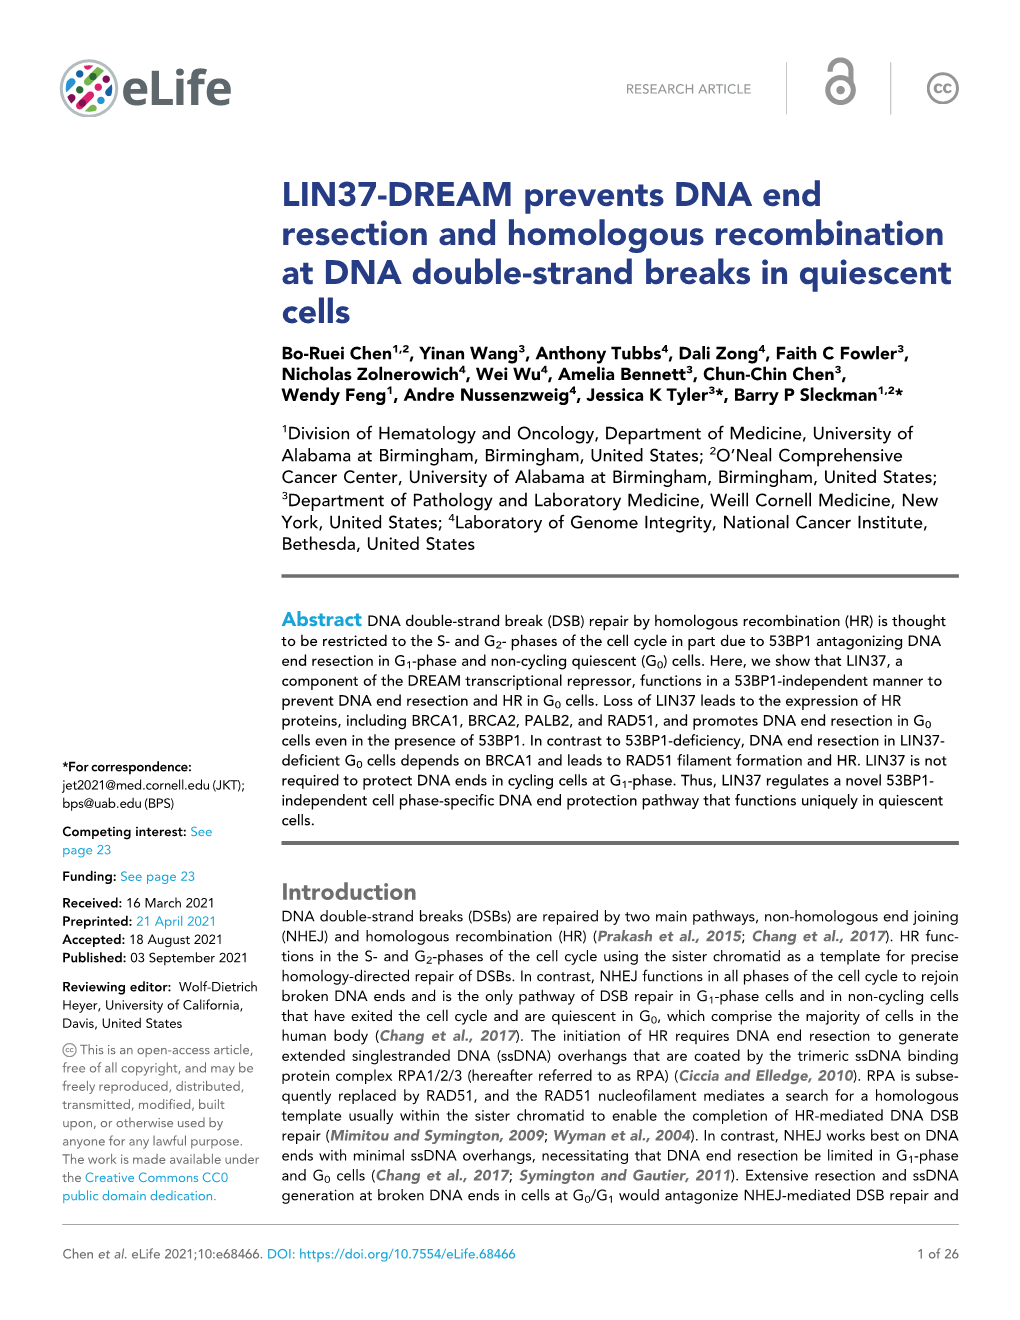 LIN37-DREAM Prevents DNA End Resection and Homologous Recombination at DNA Double-Strand Breaks in Quiescent Cells